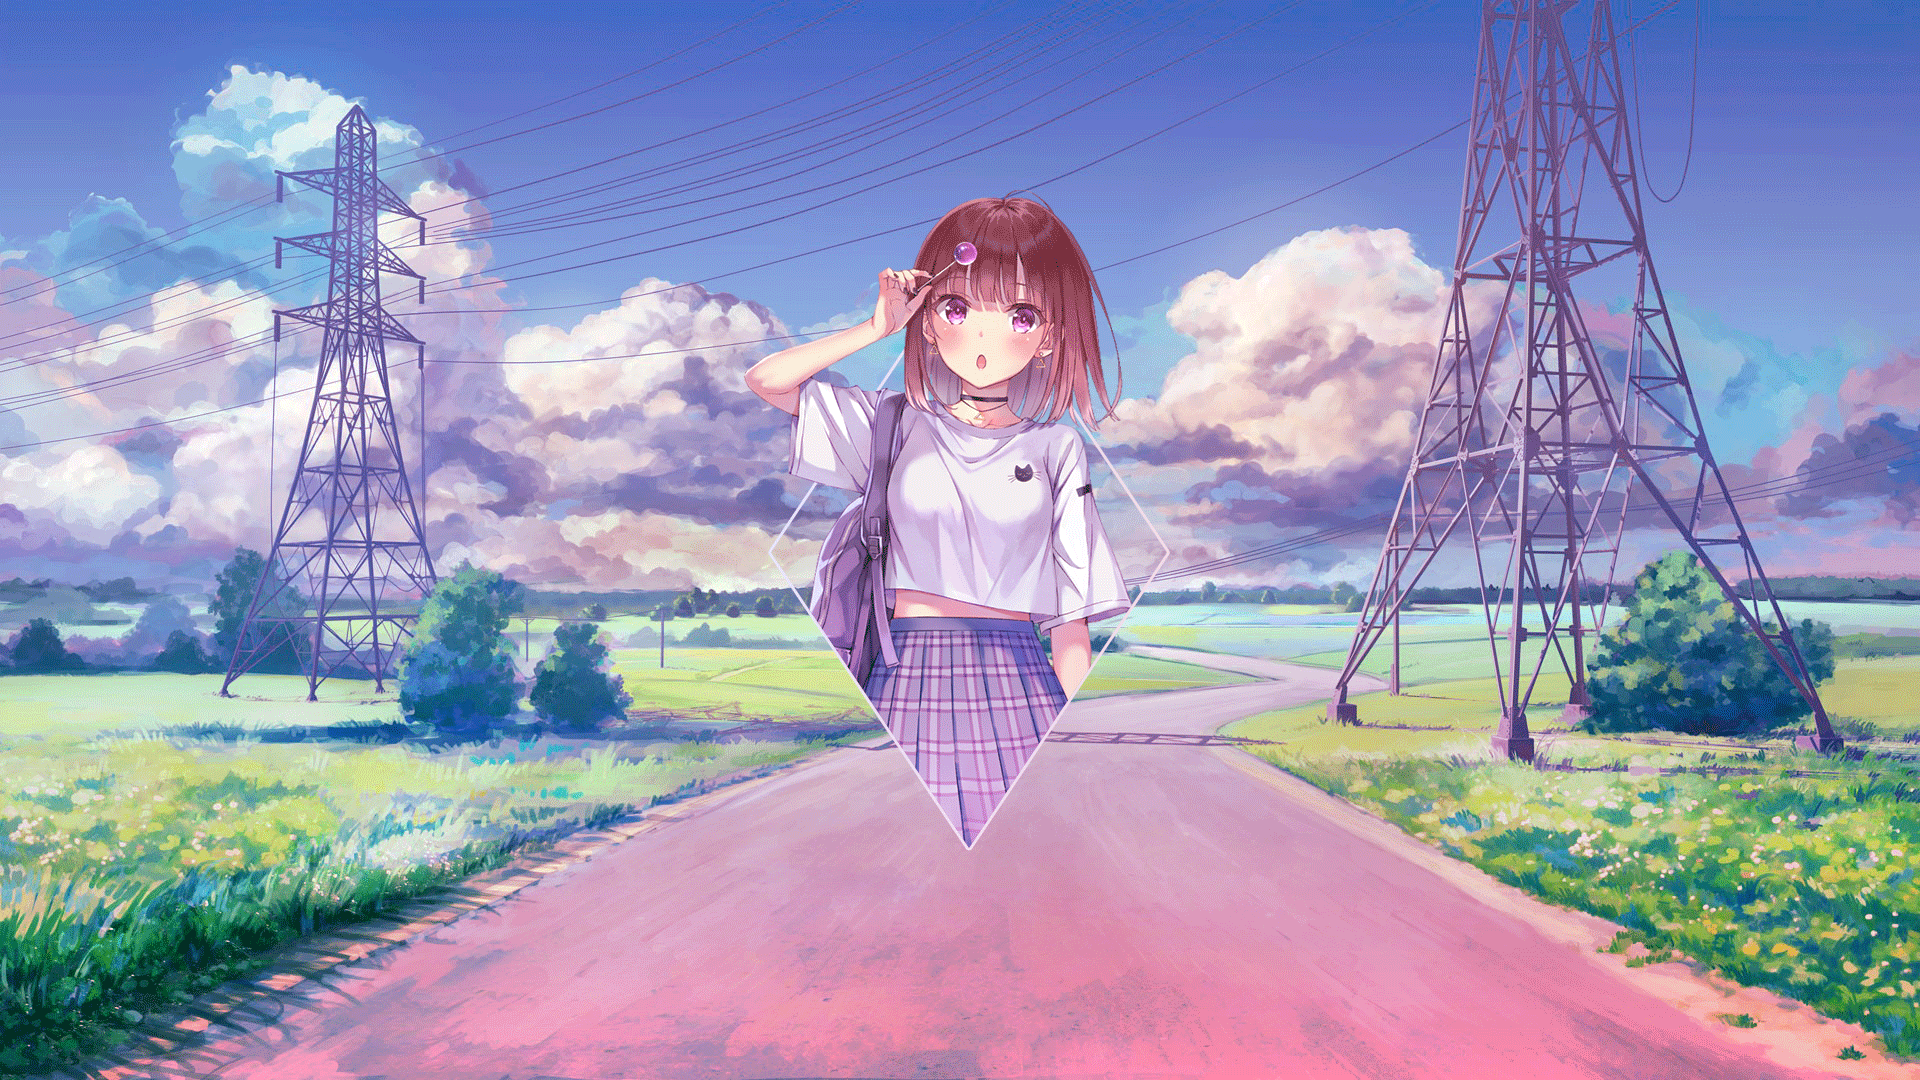 Anime Anime Girls Picture In Picture Photoshop Digital Art Platinum Conception Wallpapers Schoolgirl 1920x1080